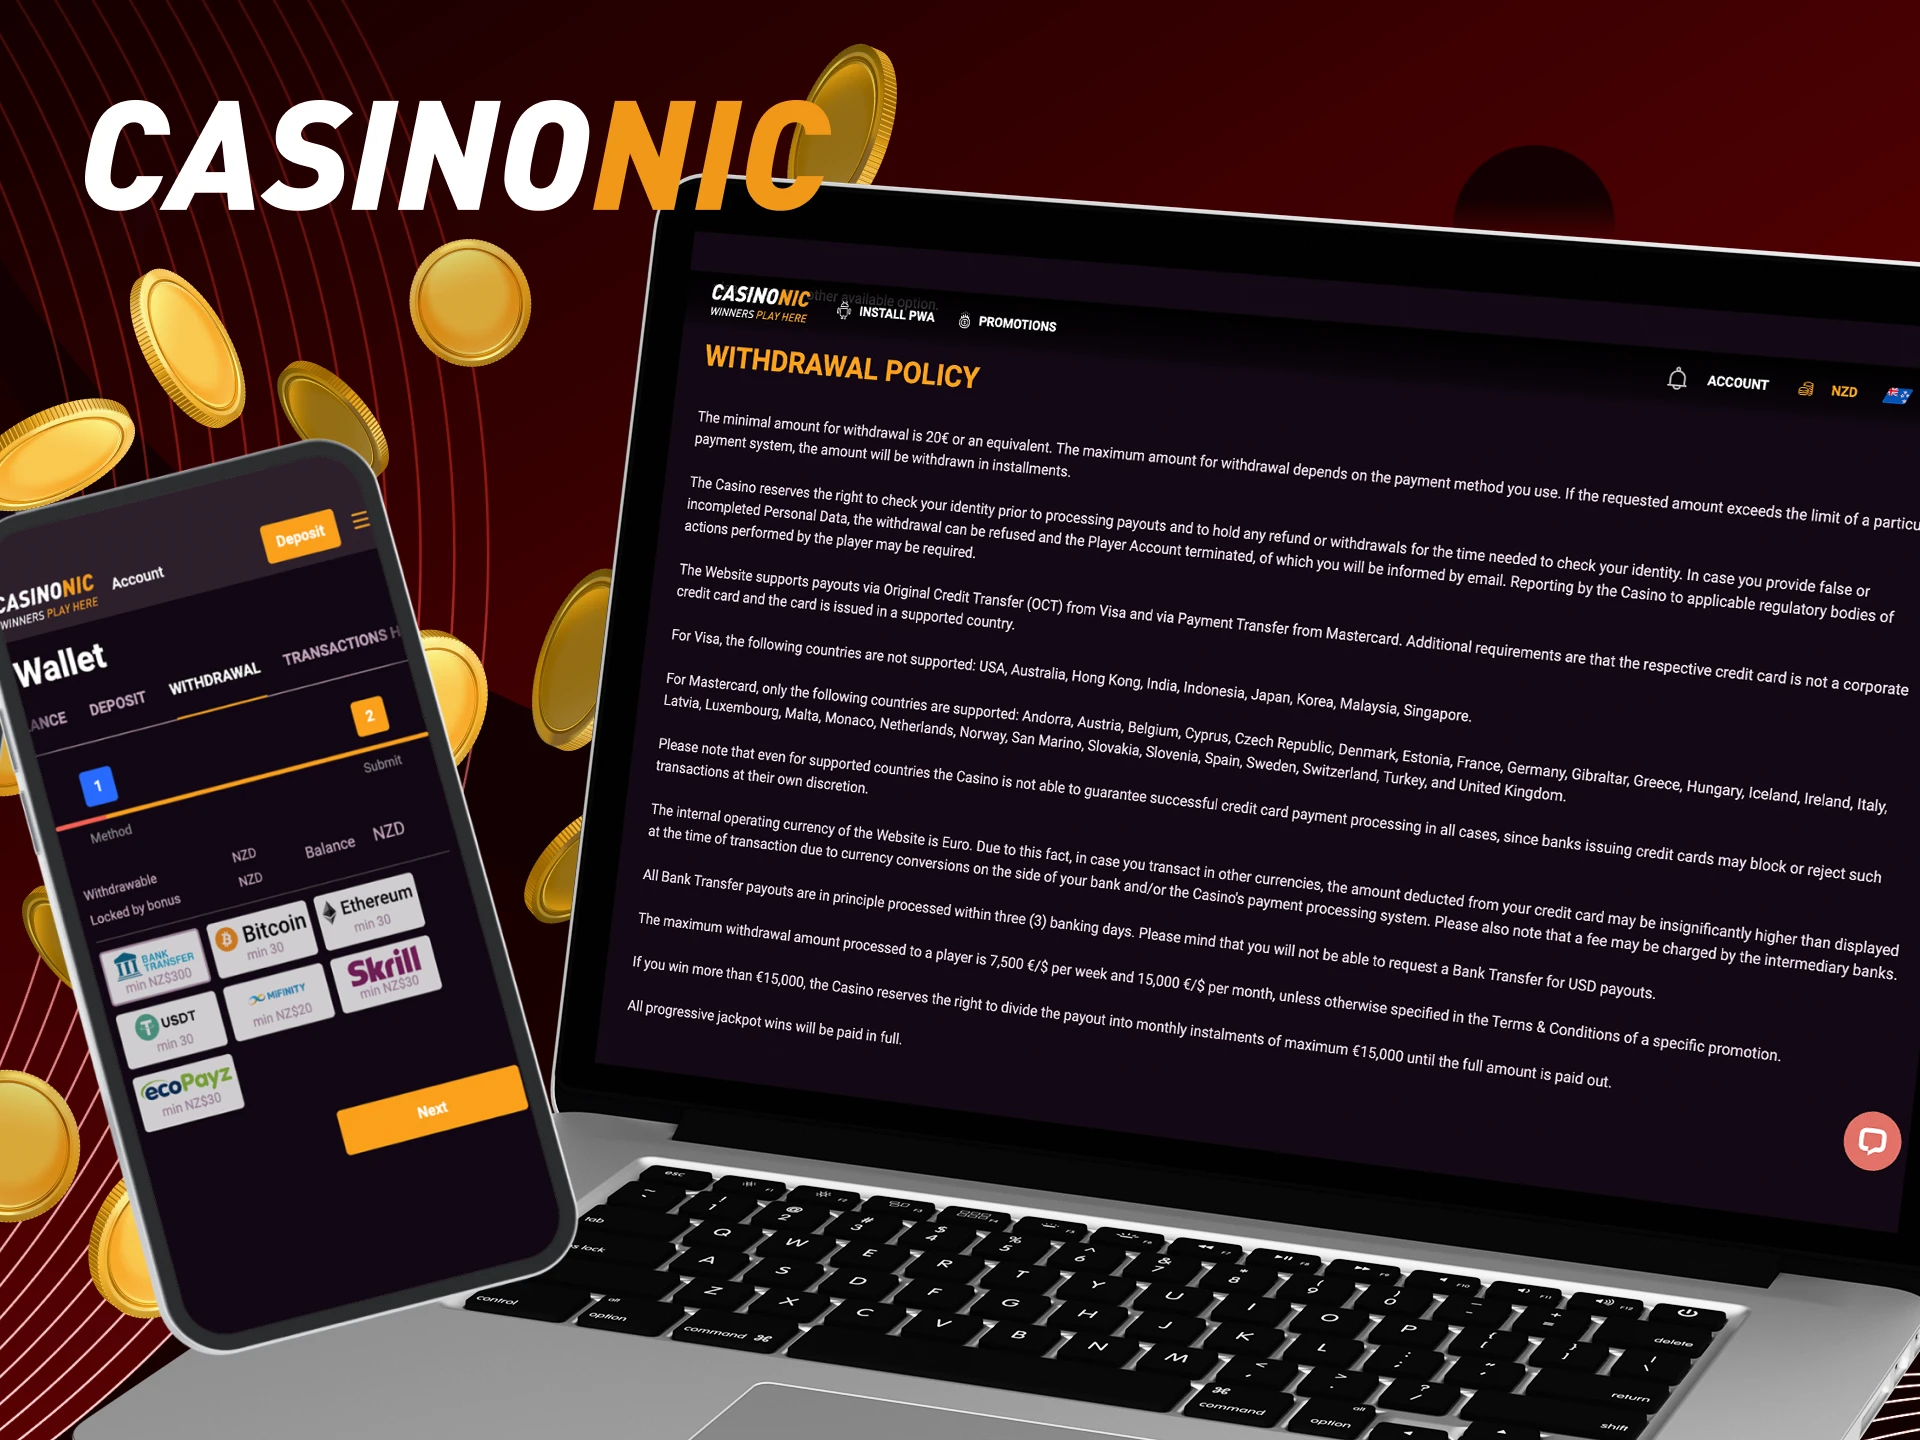 What are the conditions for withdrawing money from the online casino CasinoNic.